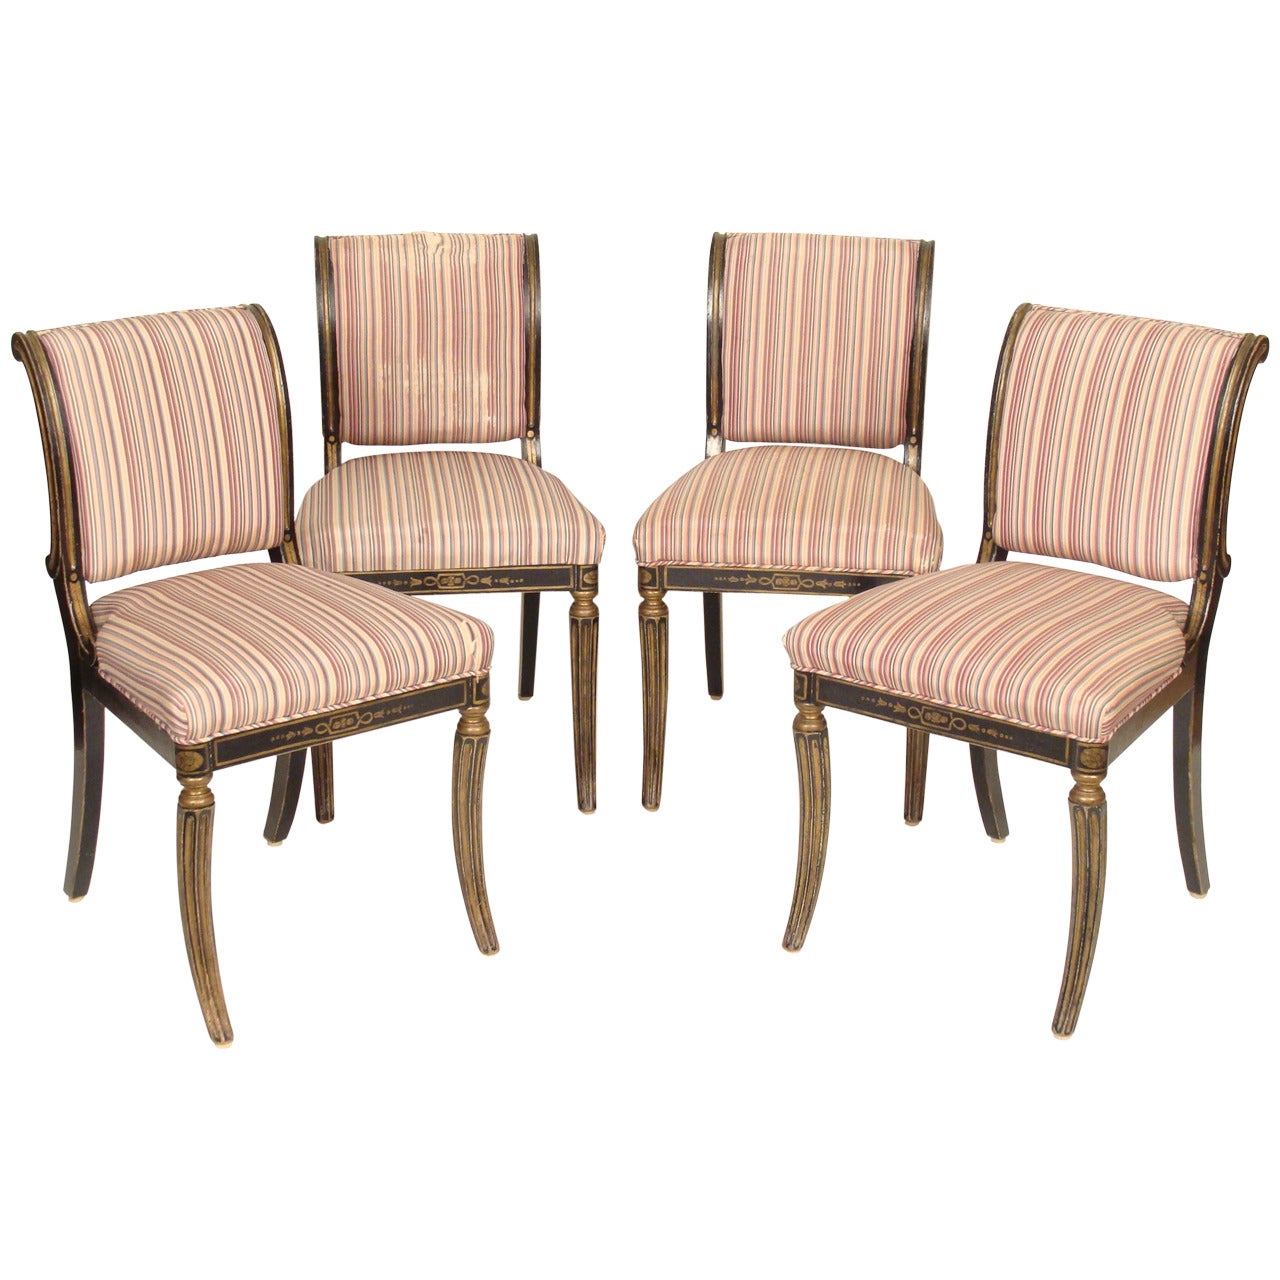 Set of Four English Regency Style Chairs